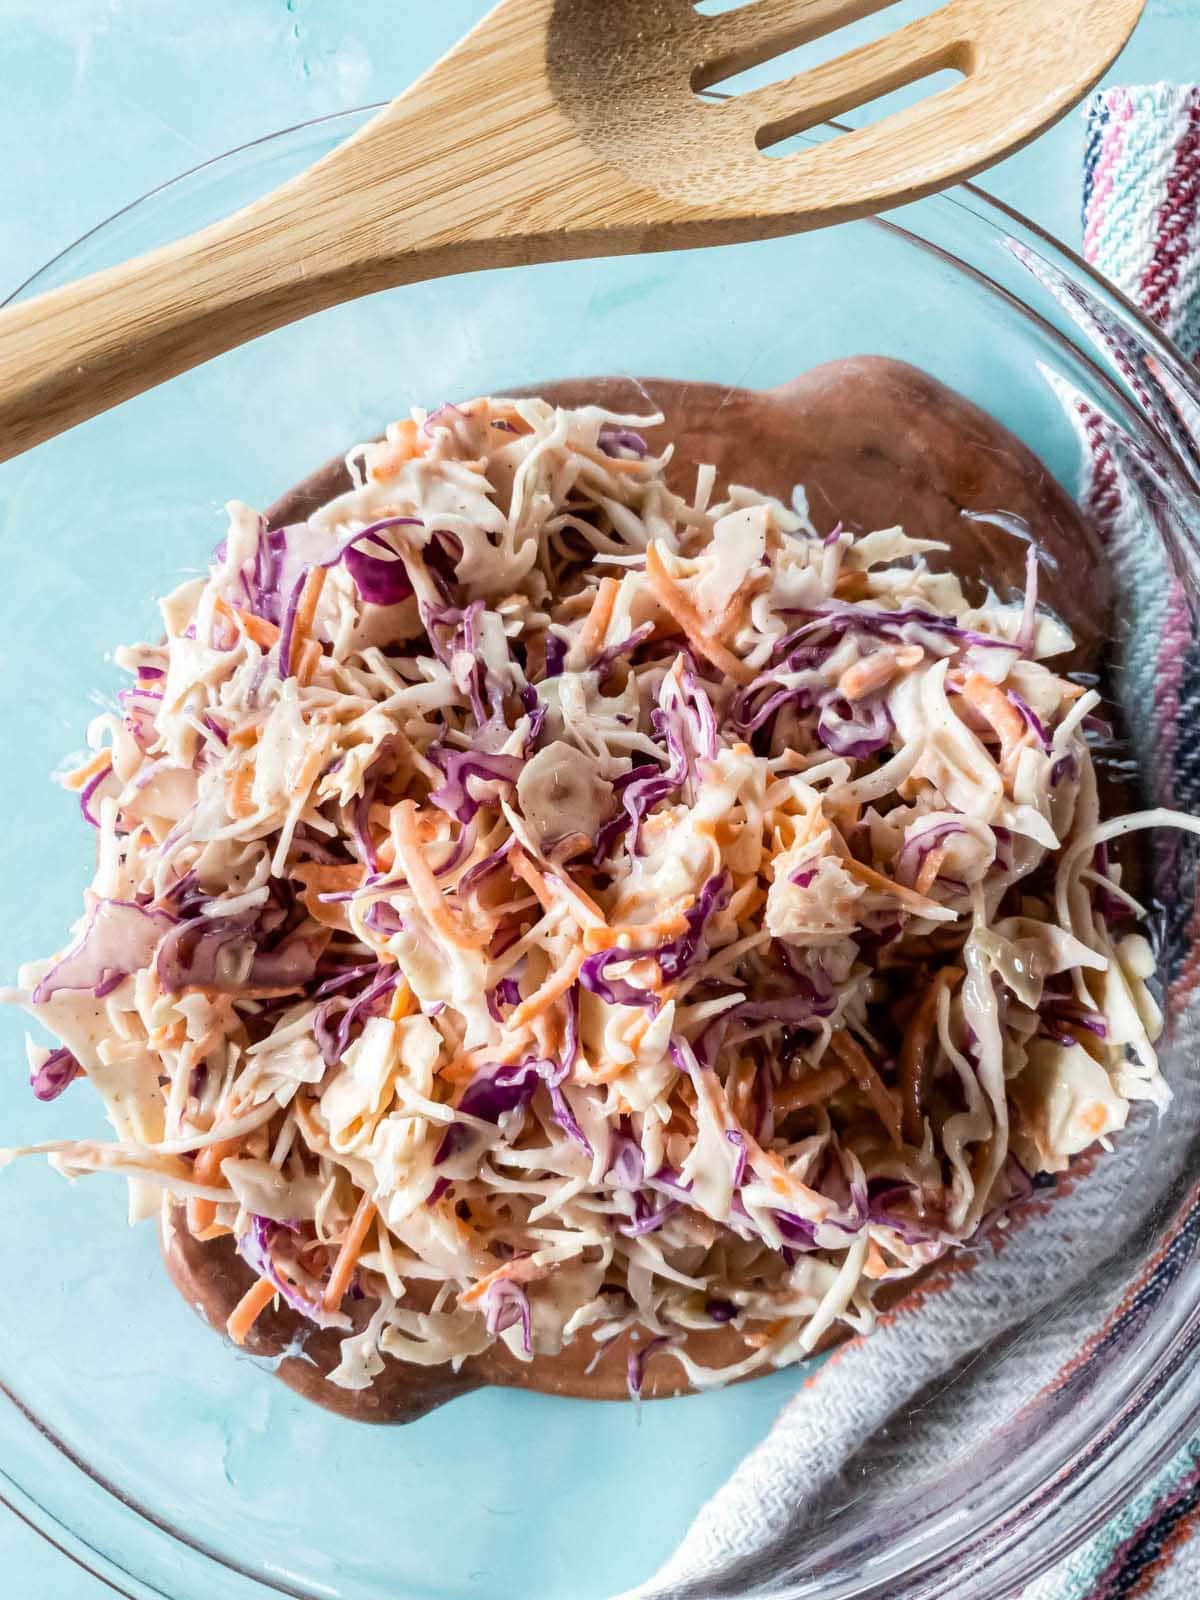 A picture of coleslaw mix tossed in creamy dressing, zoomed close.